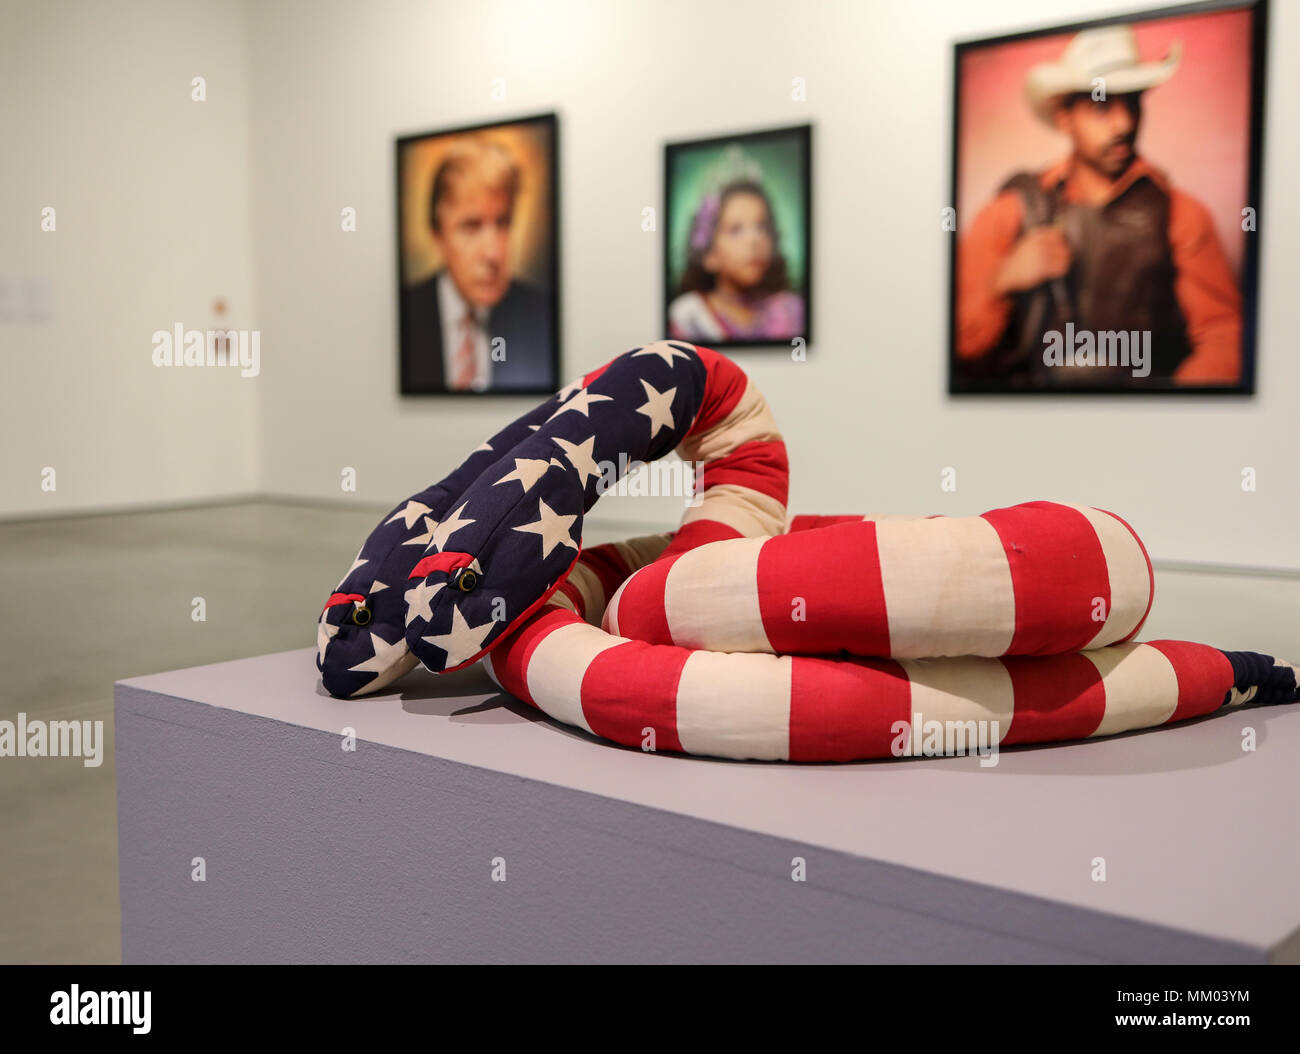 Cracow, Poland - May 8, 2018: Exibition Motherland in Art at Mocak in Krakow. Melissa Vanderberg - Polycephalic Patriot. Two-headed plush snake, made from pieces of flags is a criticism of a two party politicial system Credit: Wieslaw Jarek/Alamy Live News Stock Photo